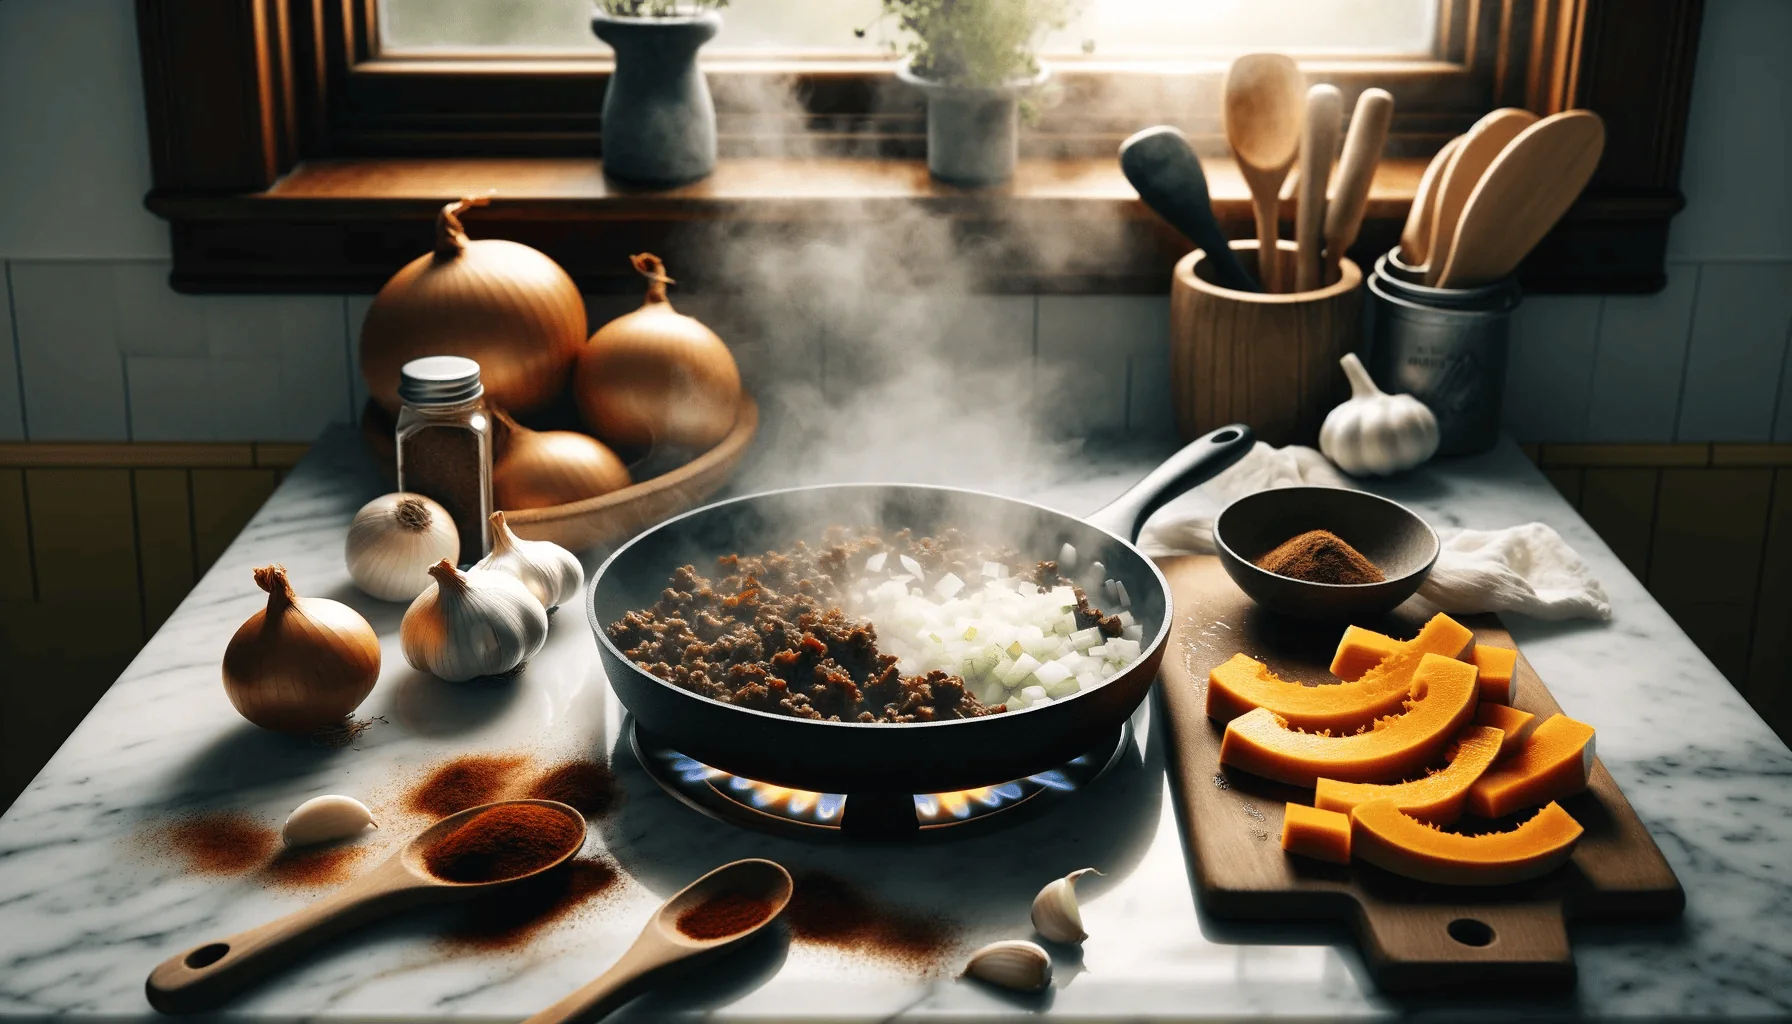 Cooking process with ingredients in a skillet